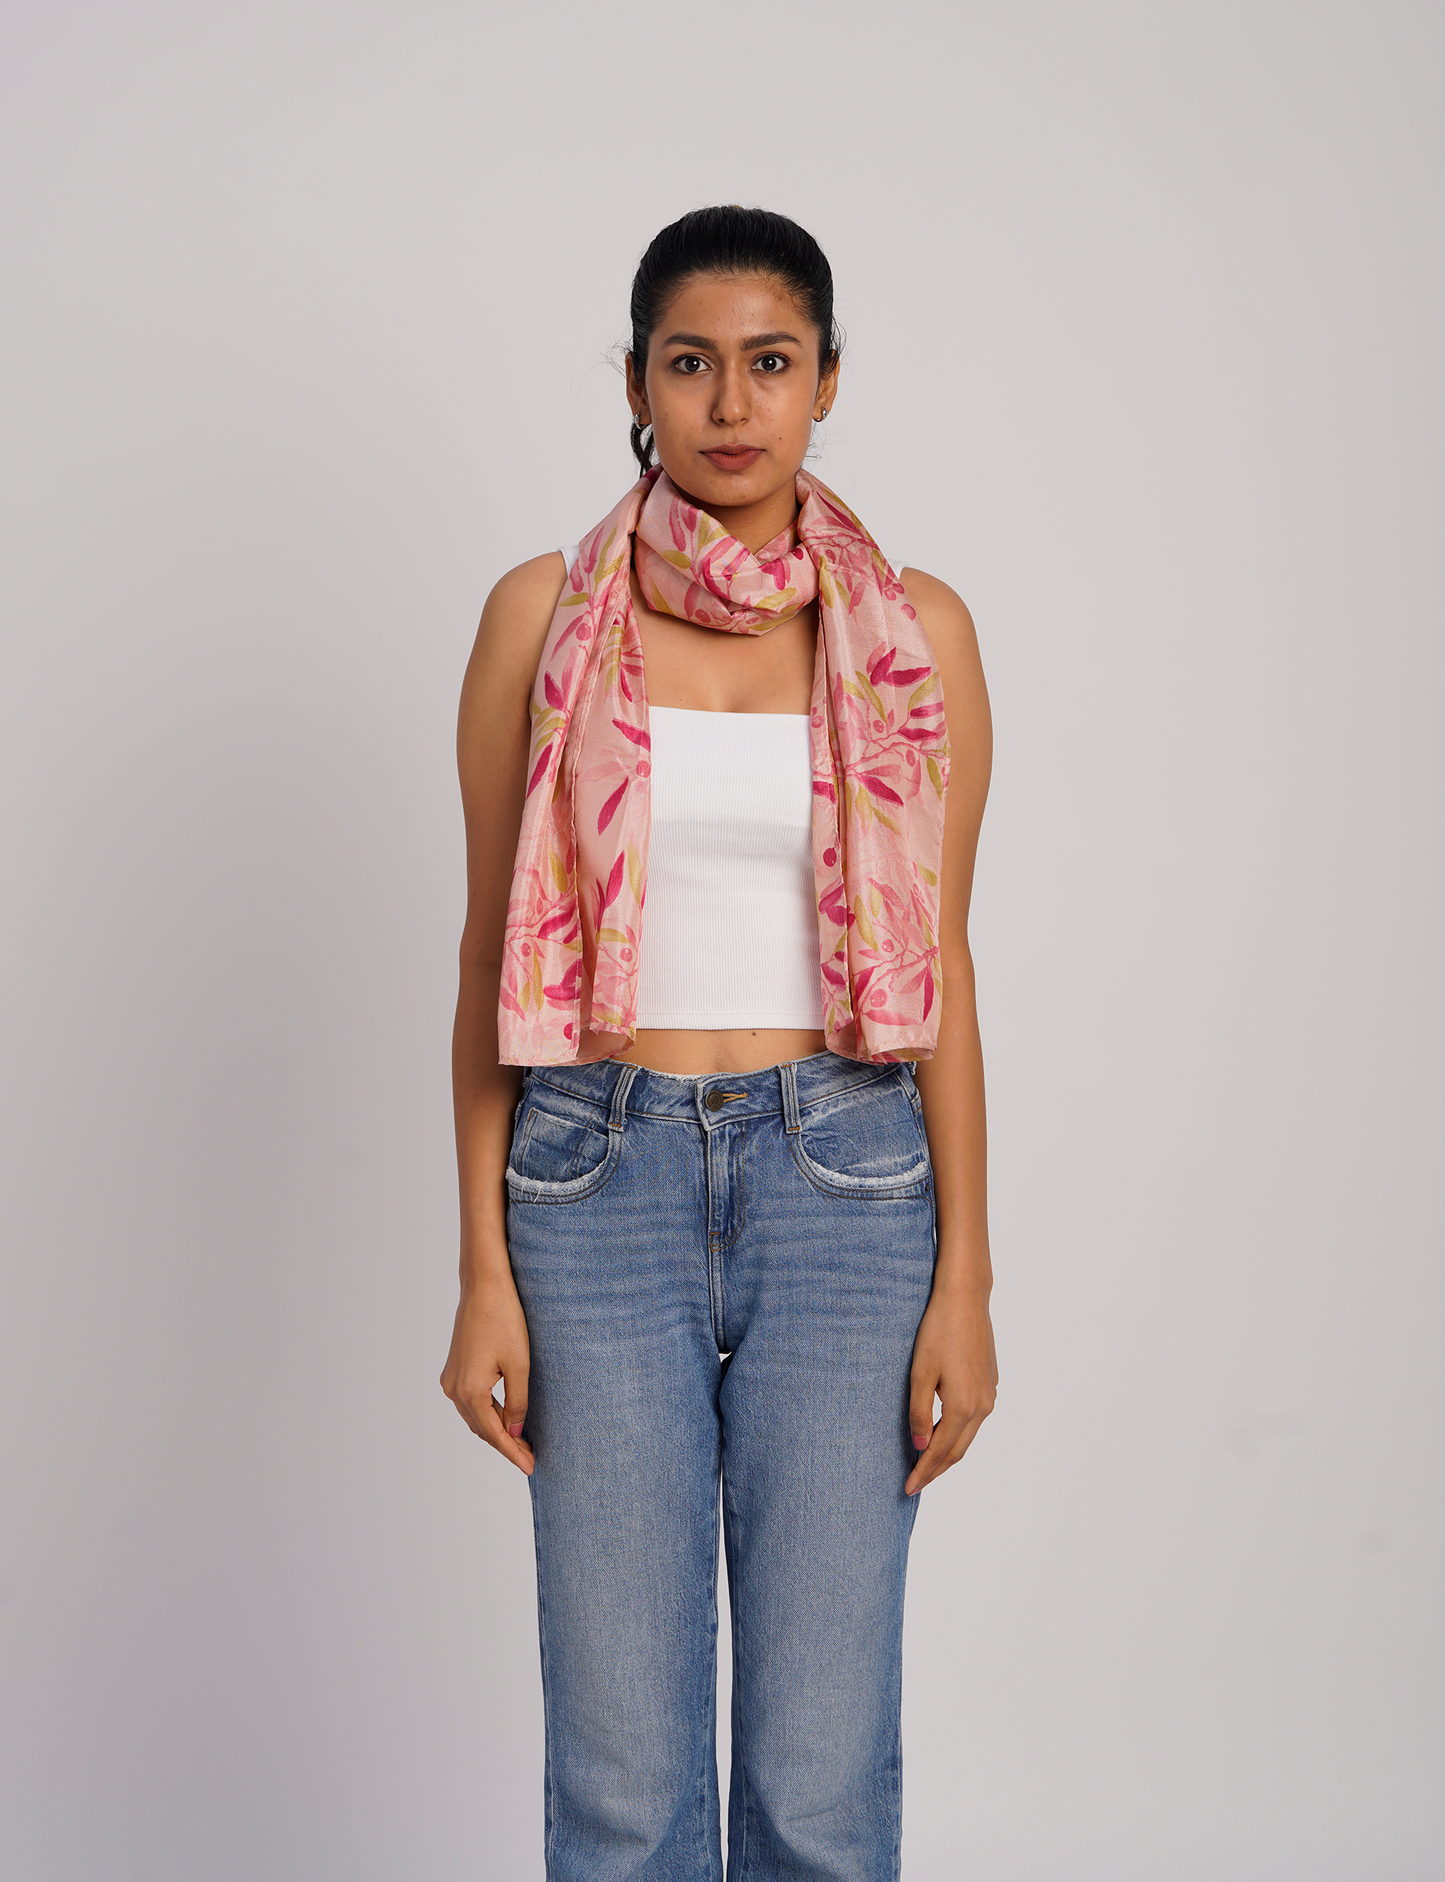 Wrap yourself in style with our printed rectangular stole, designed for neck, shoulders, or waist. Ethically crafted and embracing sustainability, this versatile accessory is a perfect addition to your wardrobe. Experience the beauty of eco-friendly fashion with our conscious clothing collection."